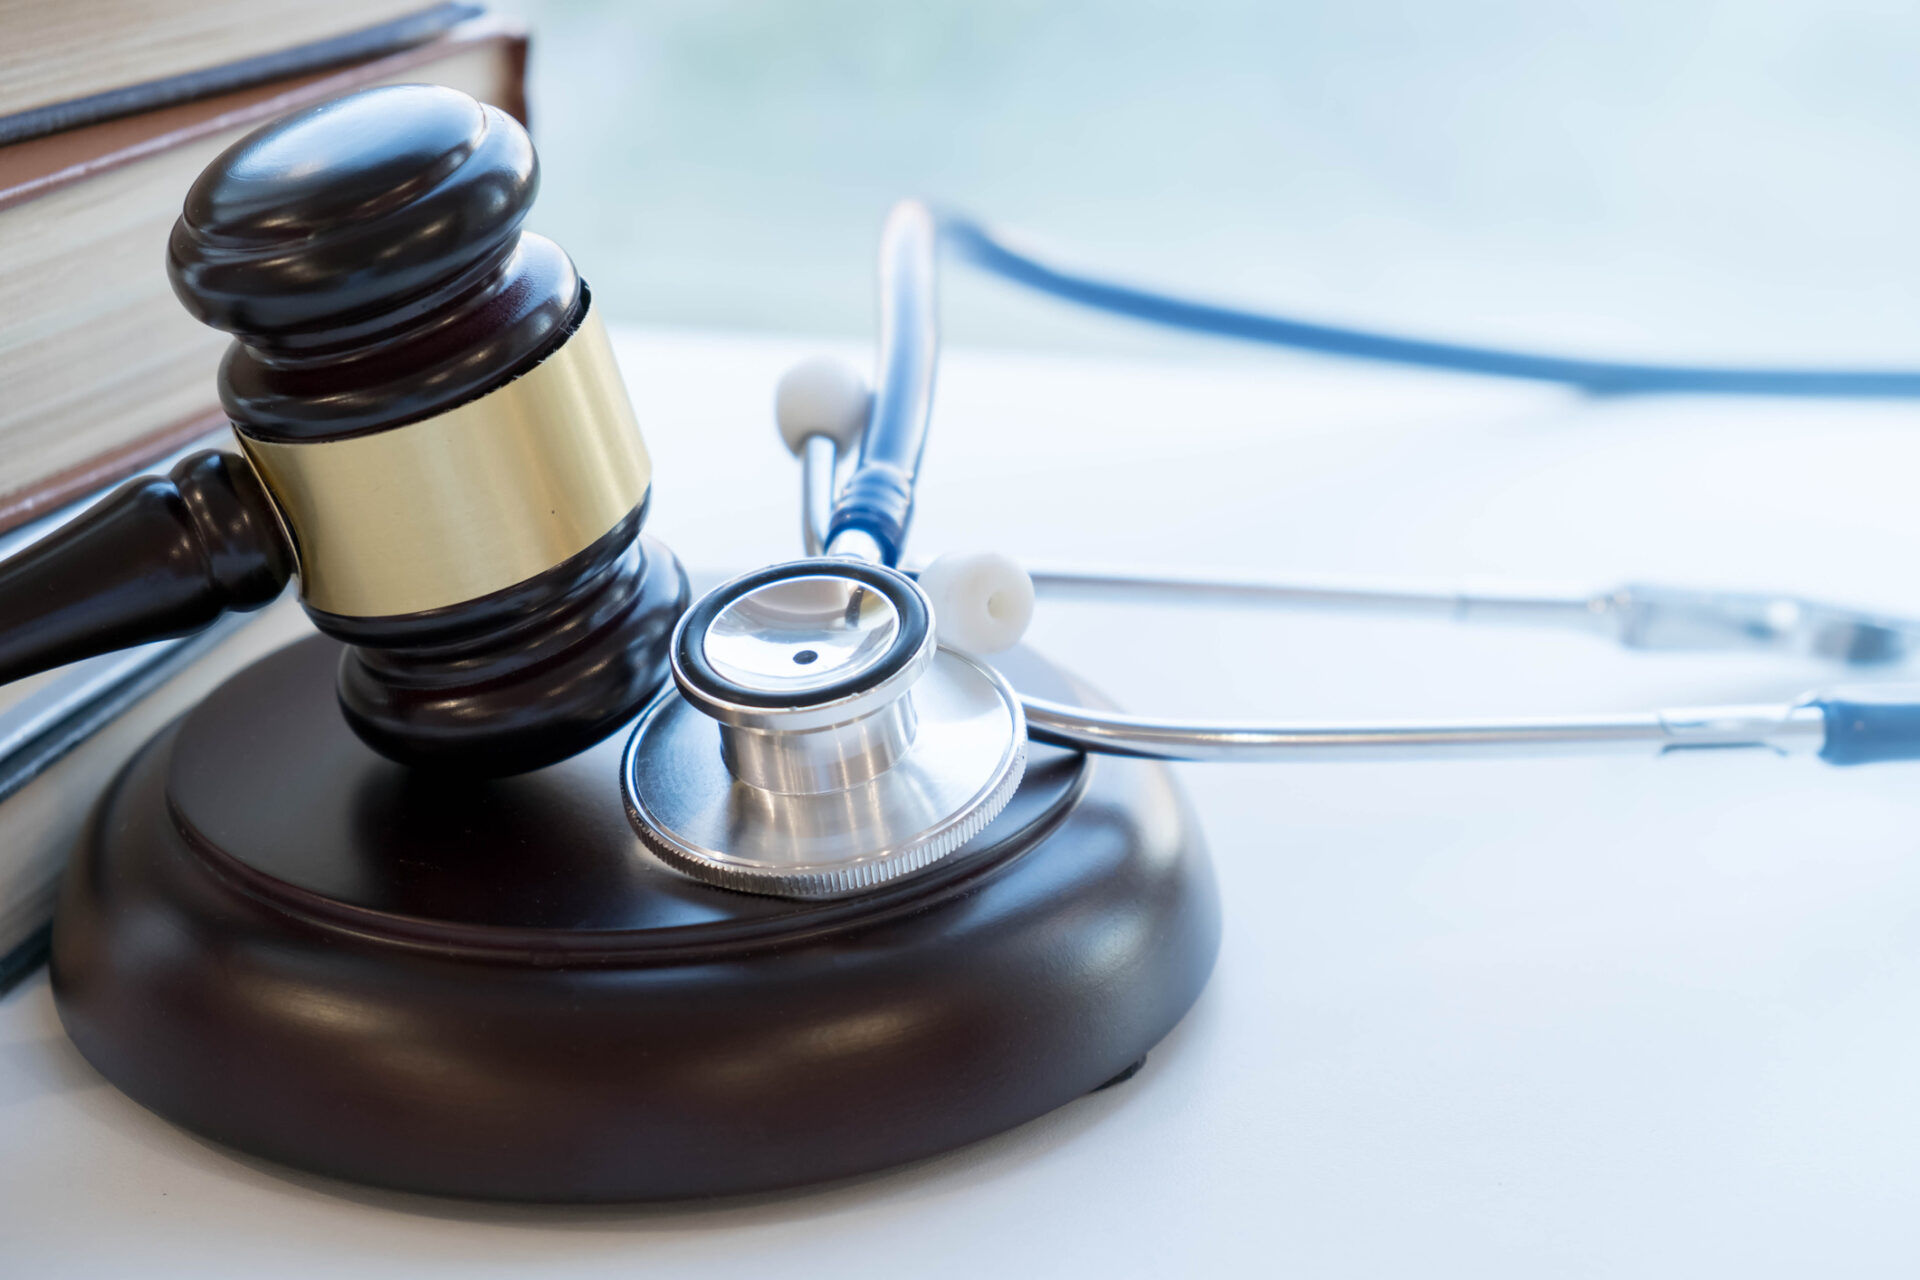 How do healthcare laws protect small business owners?